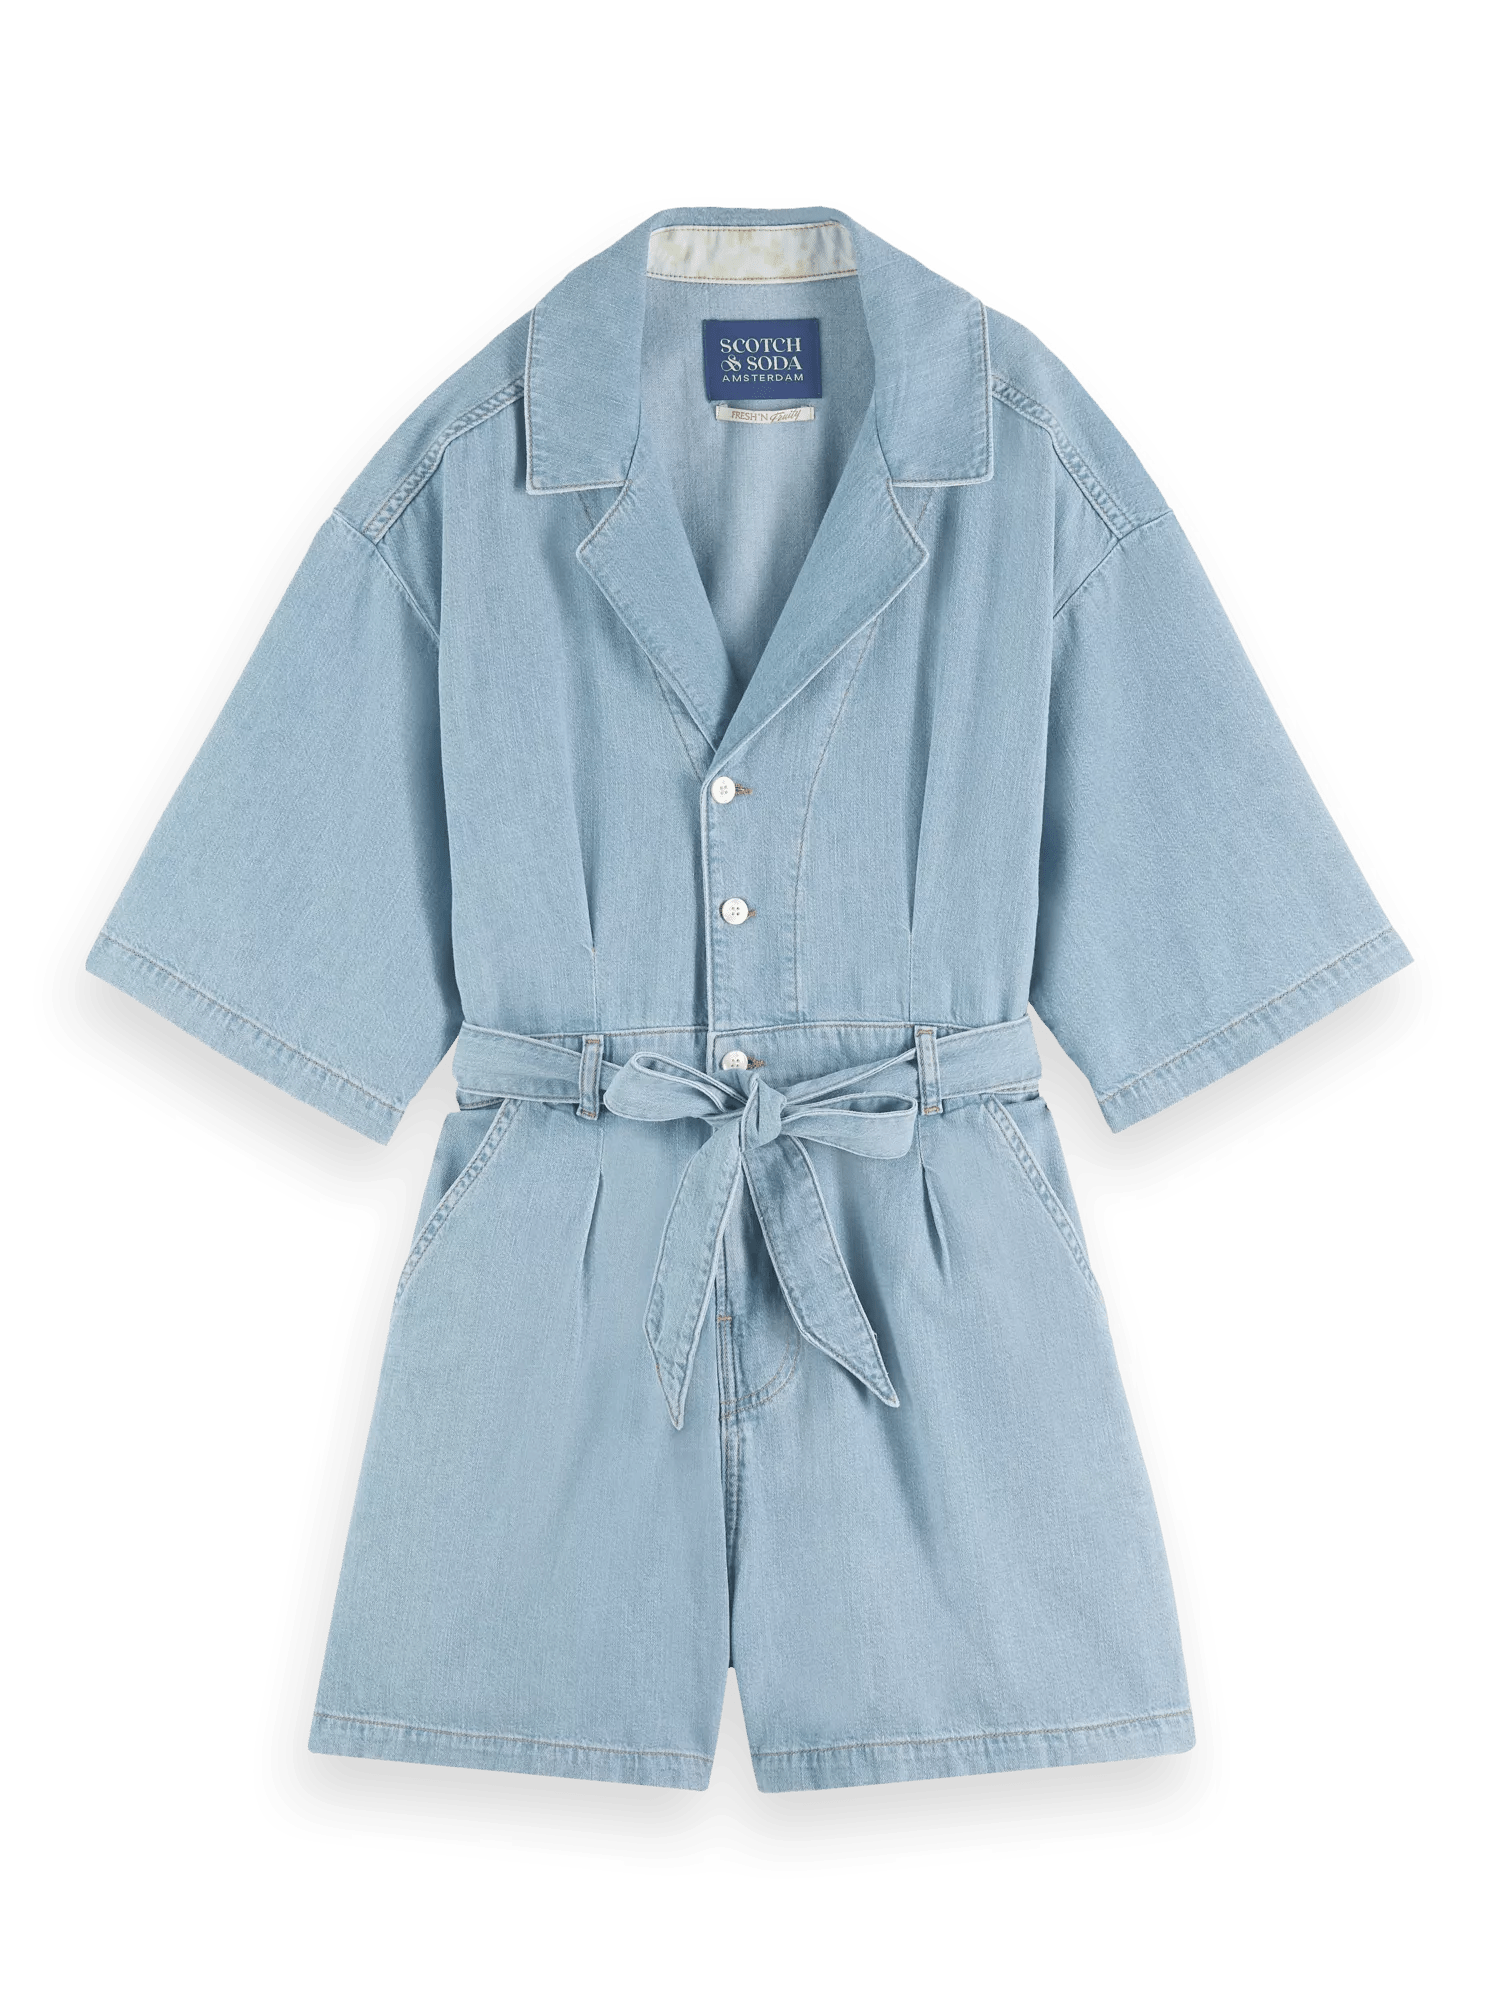 Scotch & Soda Worked out denim jumpsuit - Free Thinker FNT